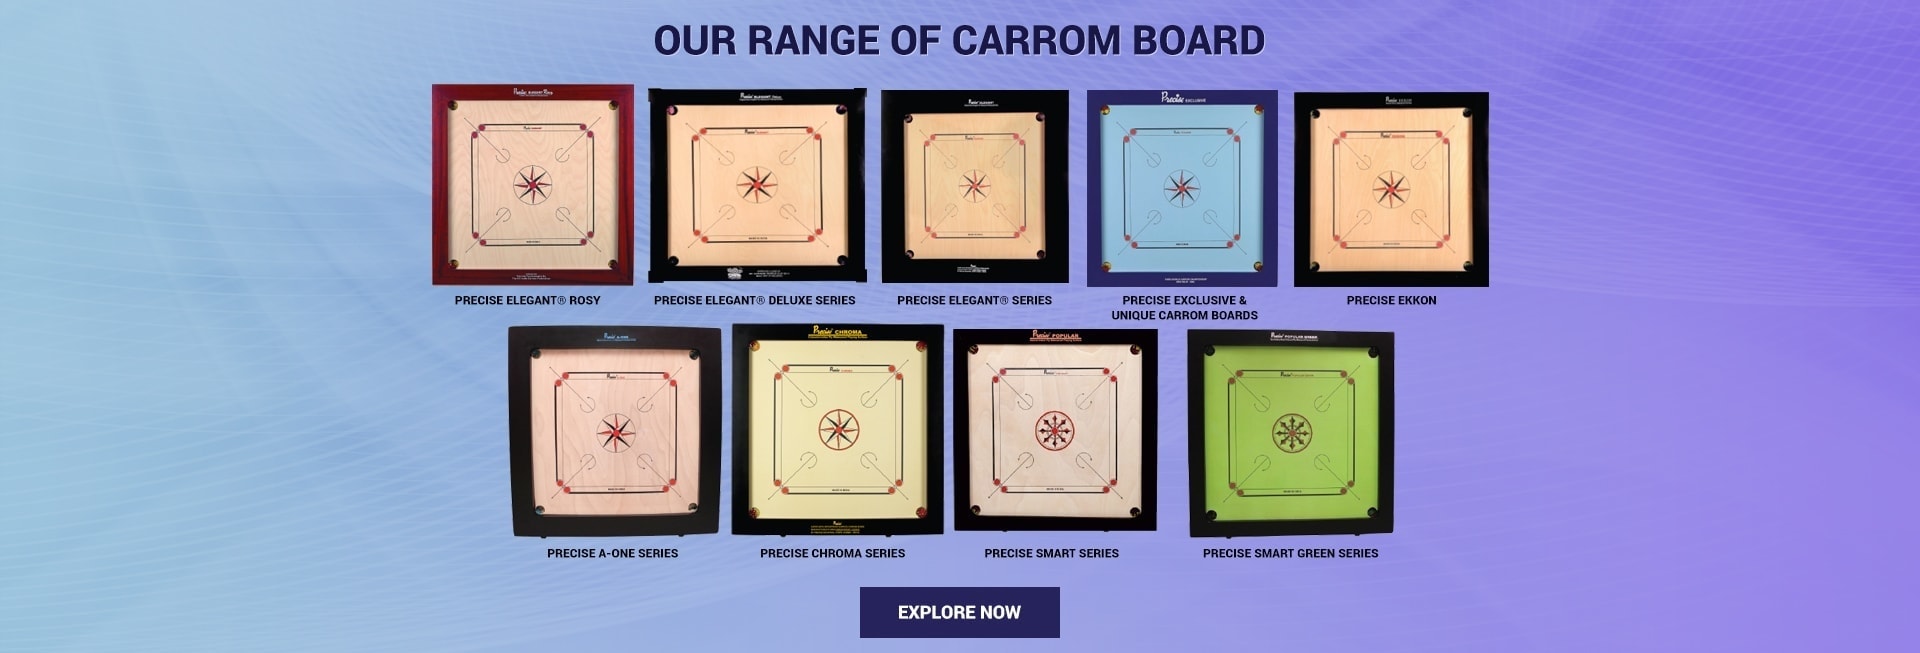 Our Range of Carrom Board